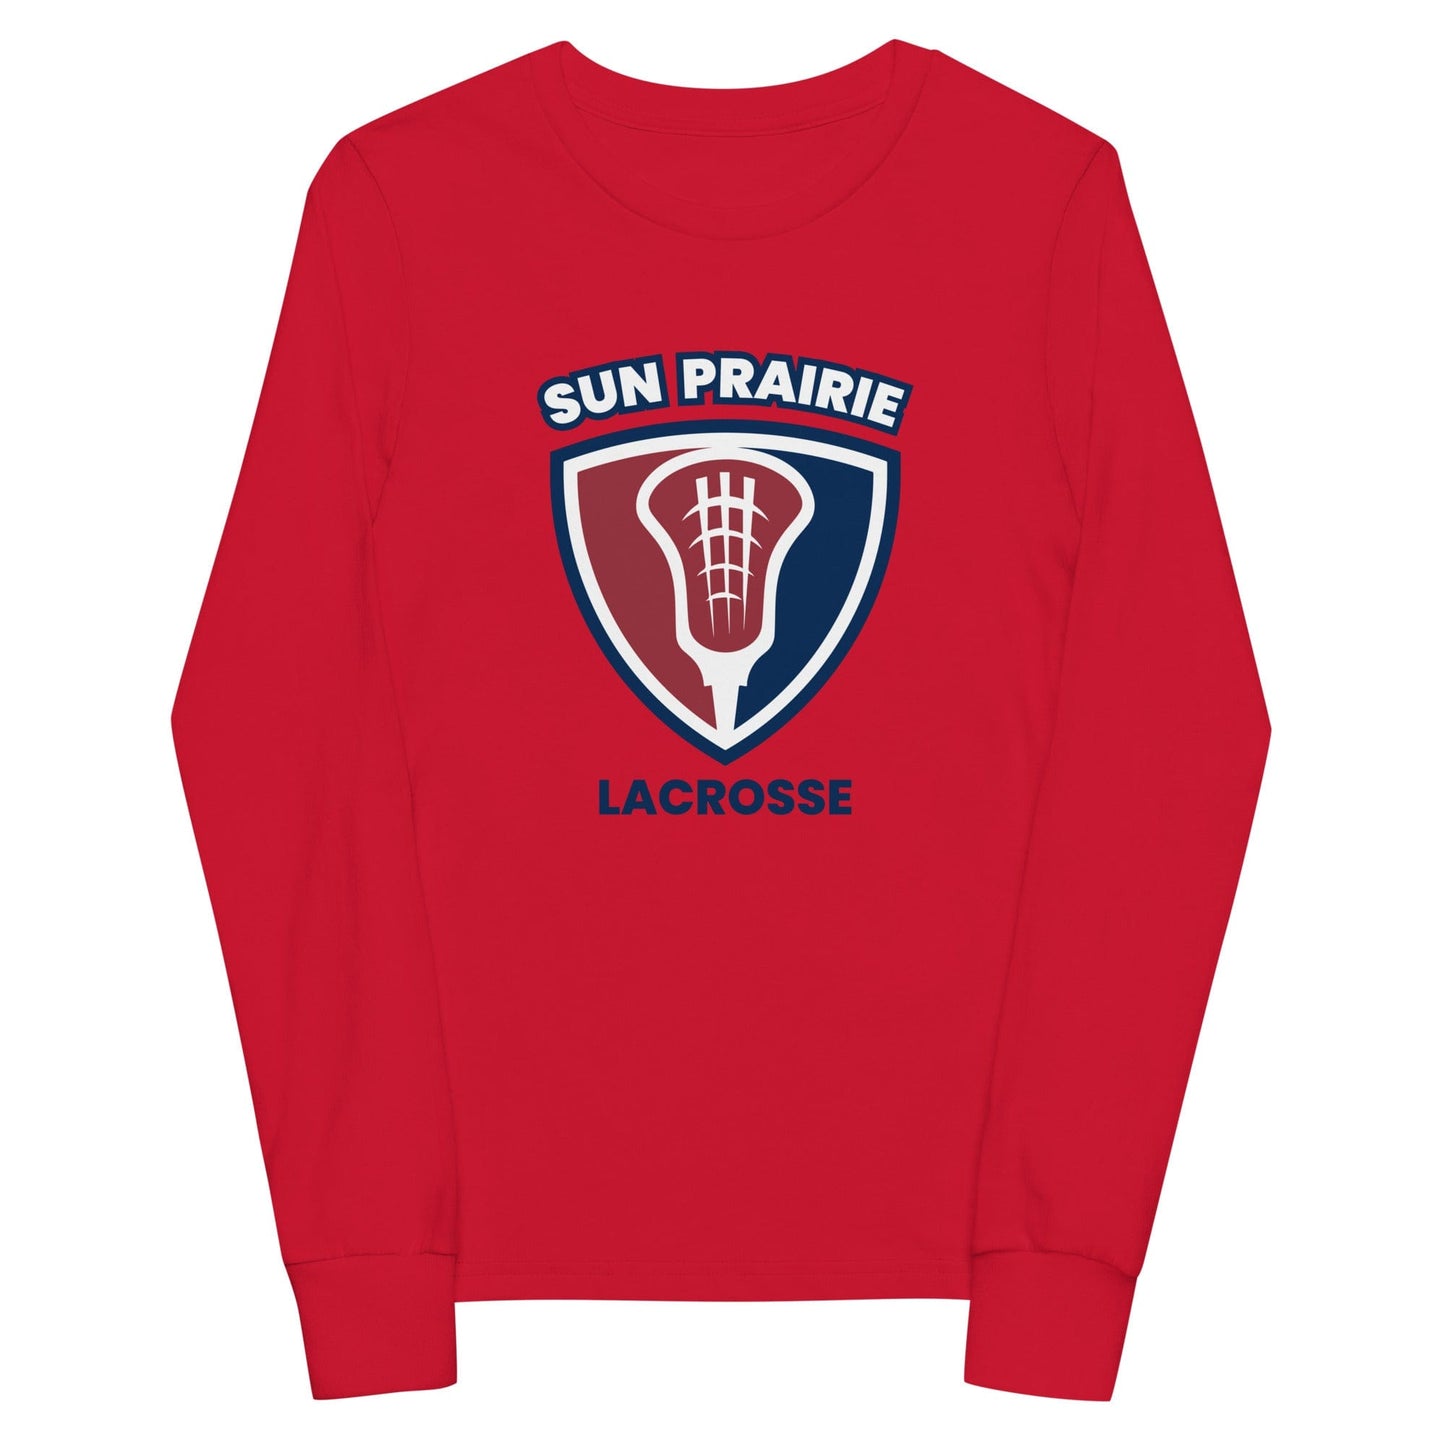 Sun Prairie Youth Lacrosse Youth Cotton Long Sleeve T-Shirt Signature Lacrosse